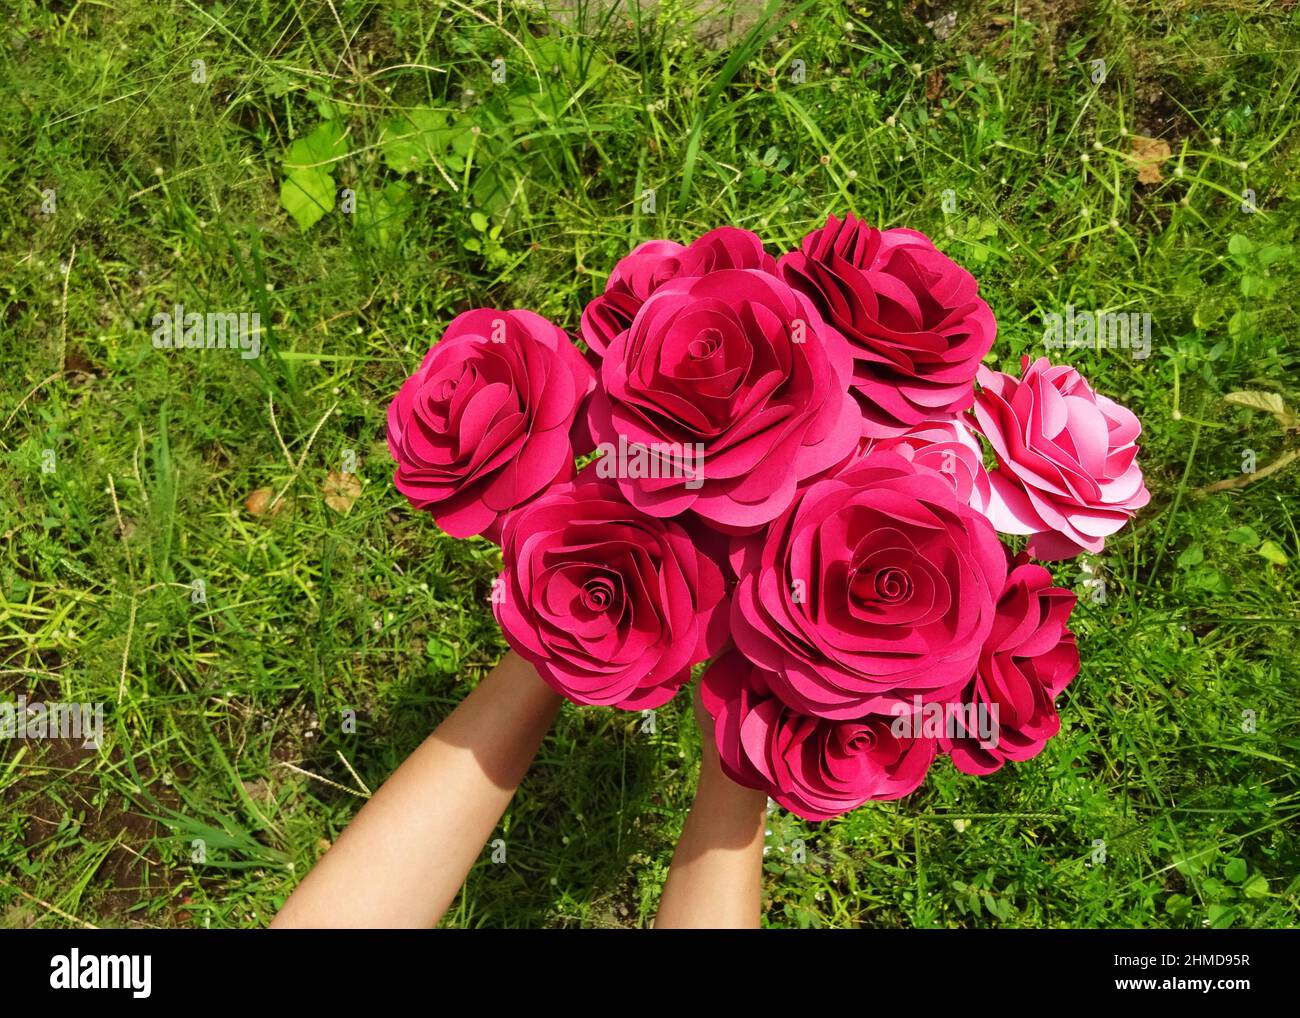 Pink paper rose Stock Photo